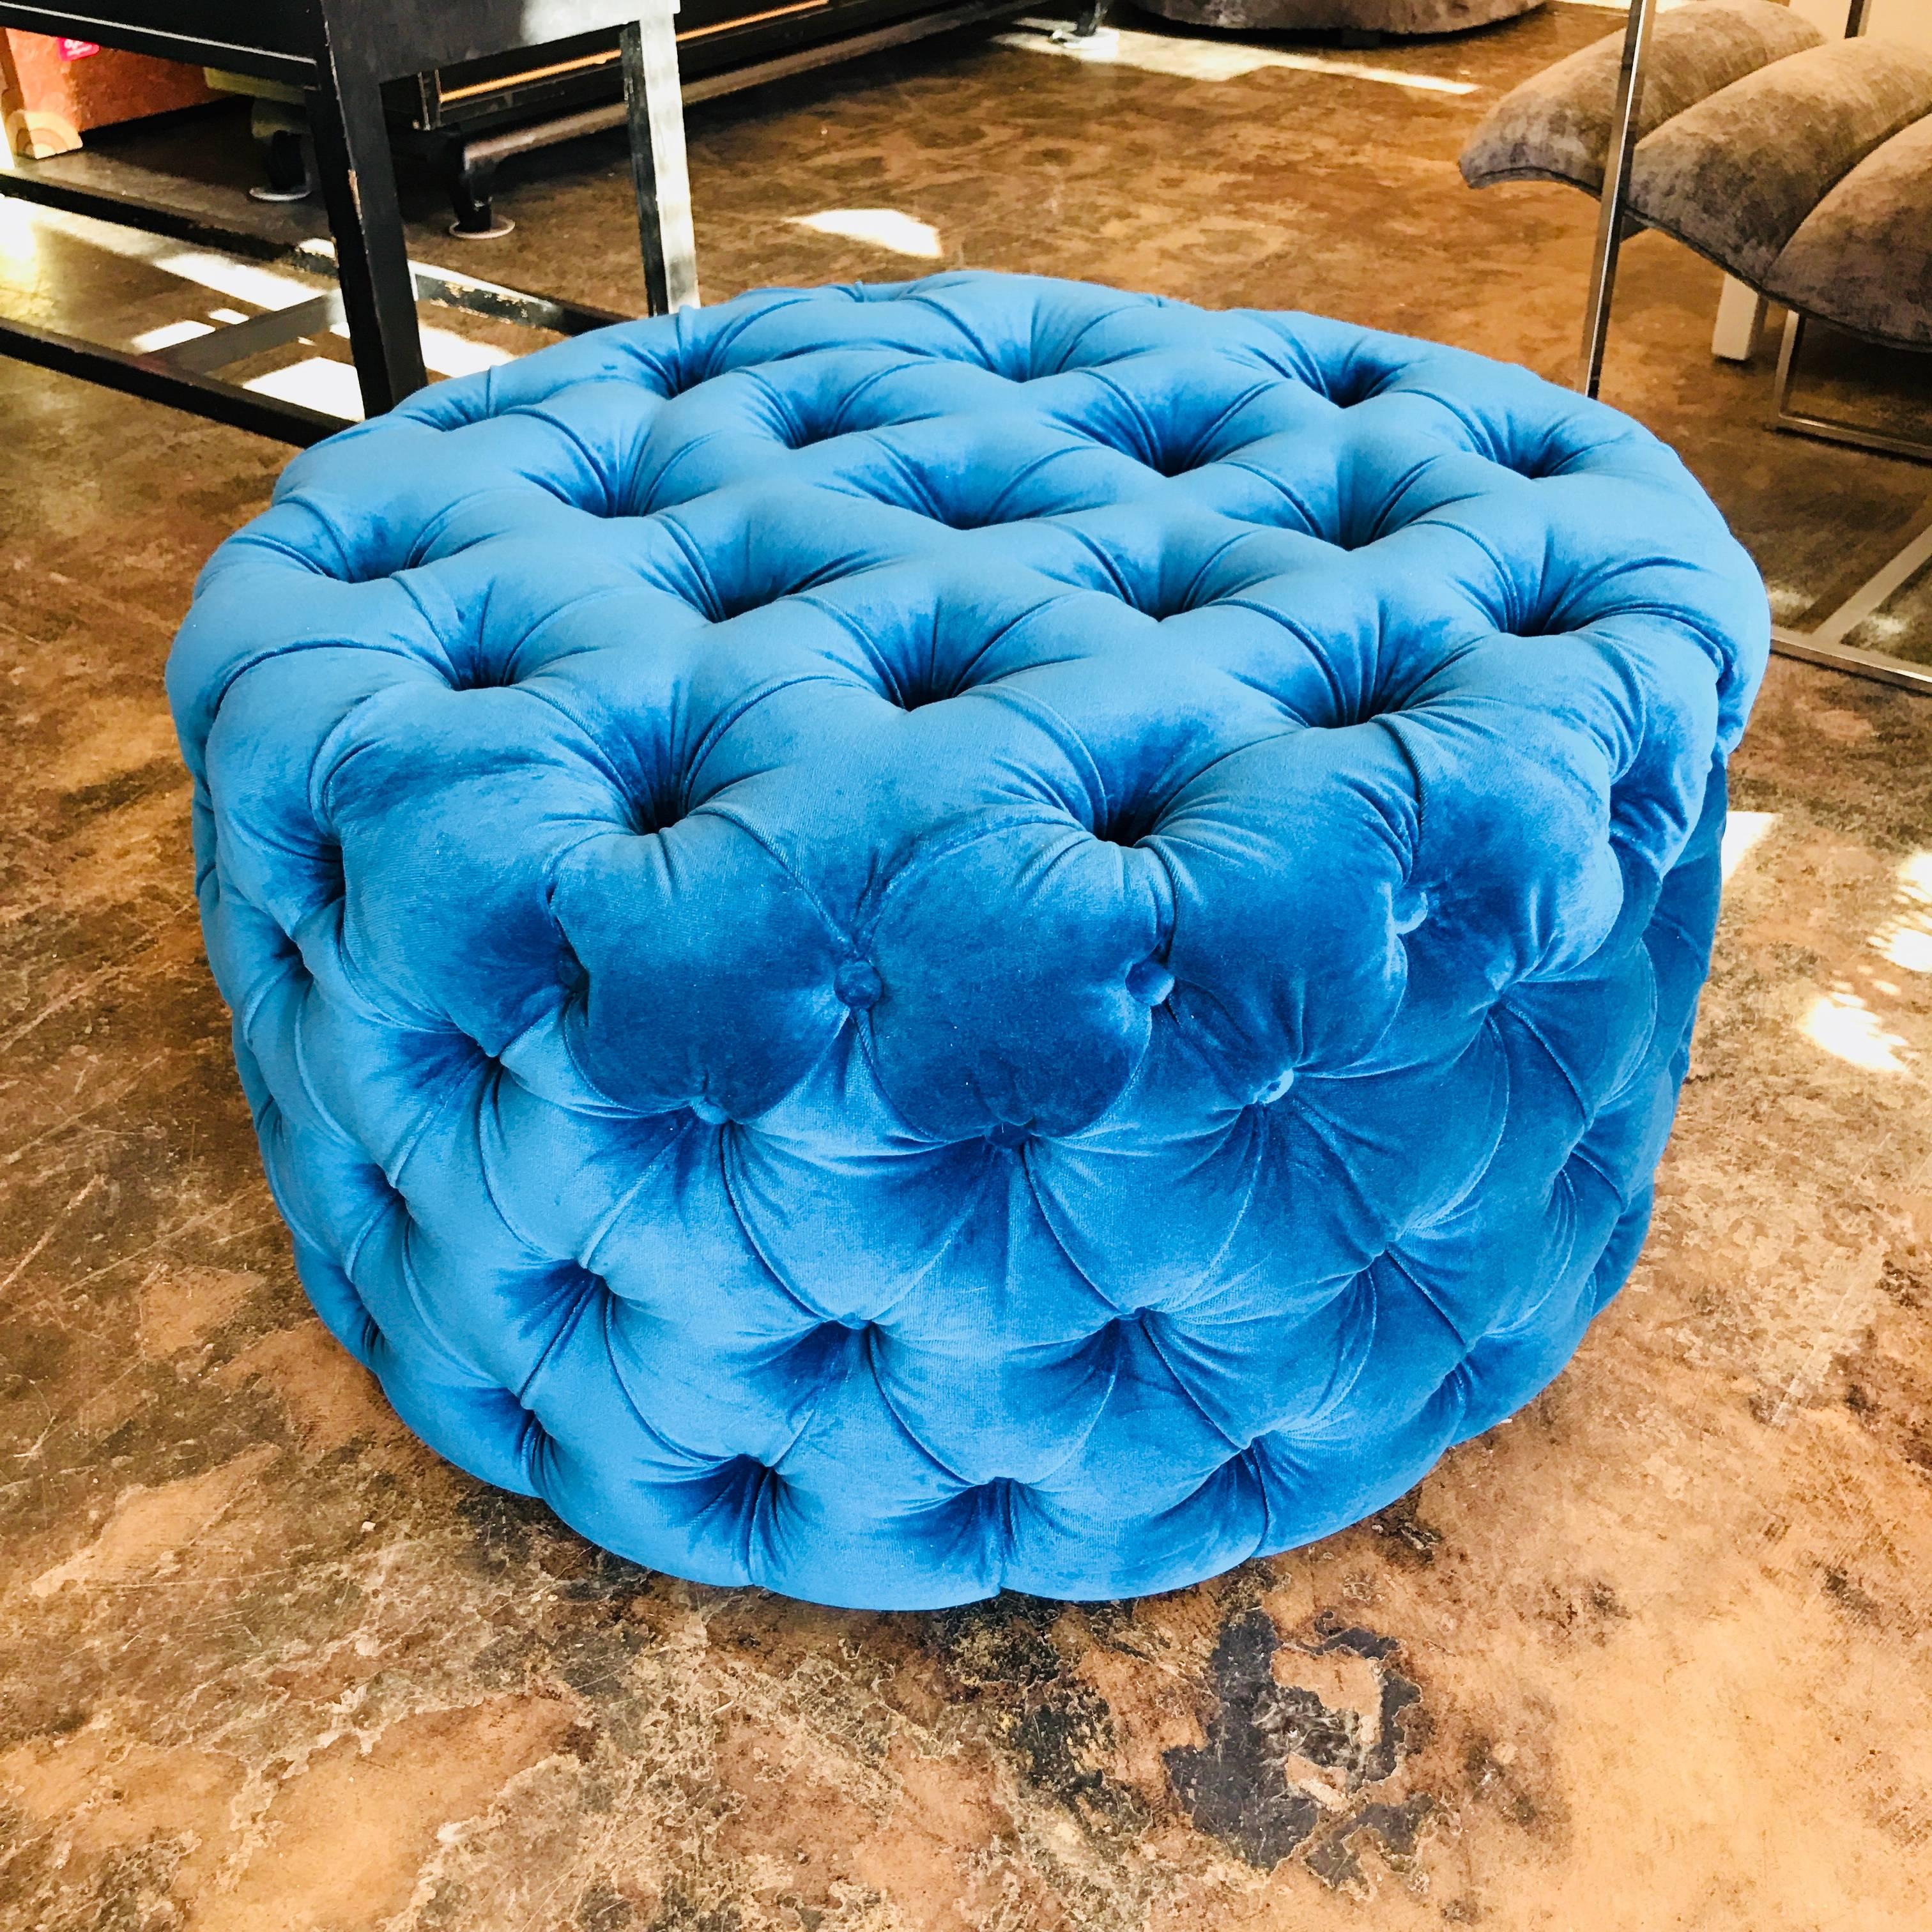 Custom blue tufted velvet round ottoman. This ottoman can be made to any size with COM.
Four yards minimum for 32